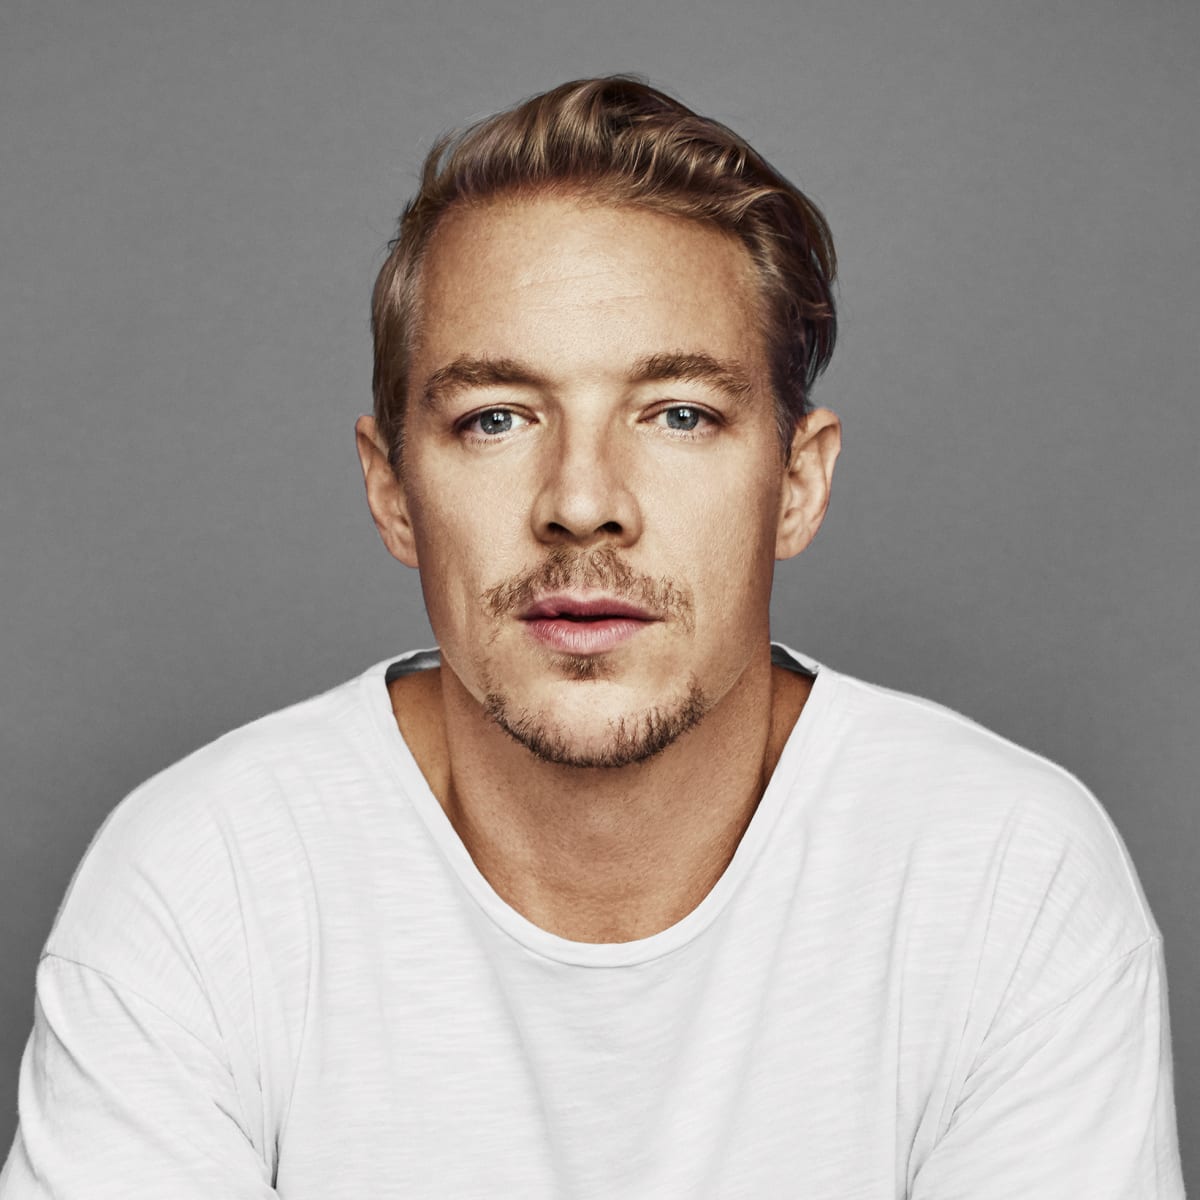 Diplo Comments on Sexuality in Twitter Exchange: “Masculinity Is a Prison" - EDM.com - The Latest Electronic Dance Music News, Reviews & Artists